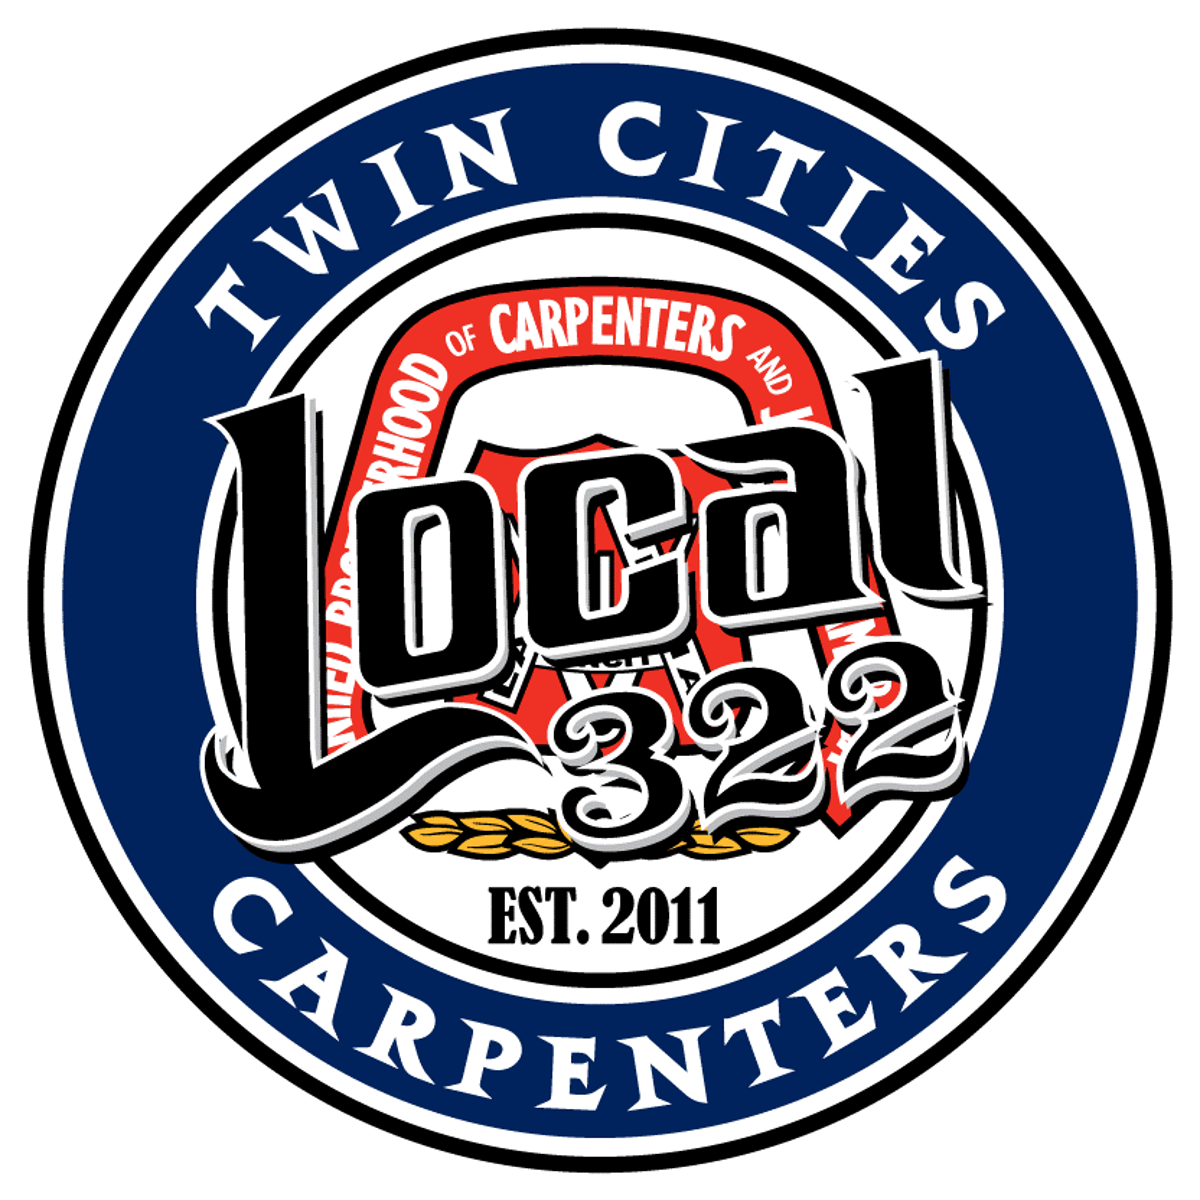 About Carpenters Local 322